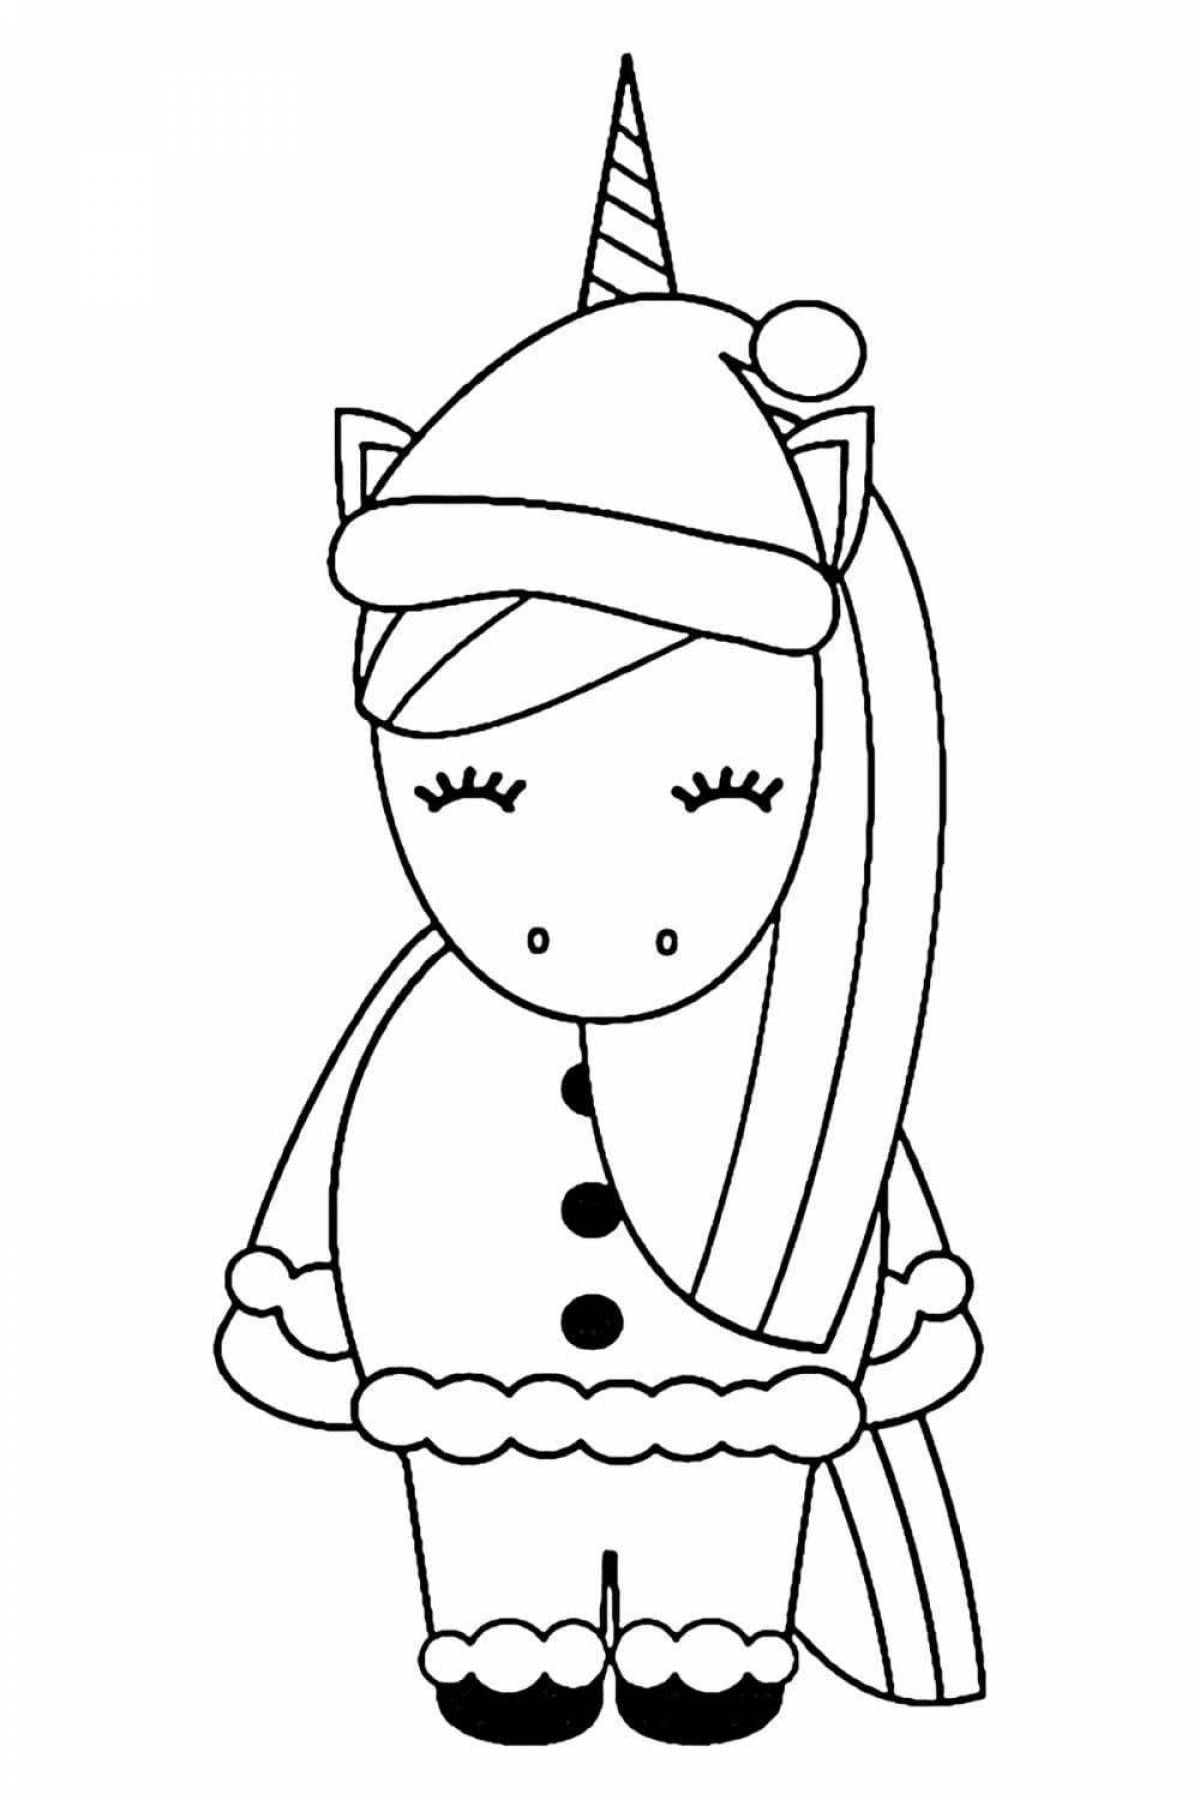 Live cute Christmas coloring book